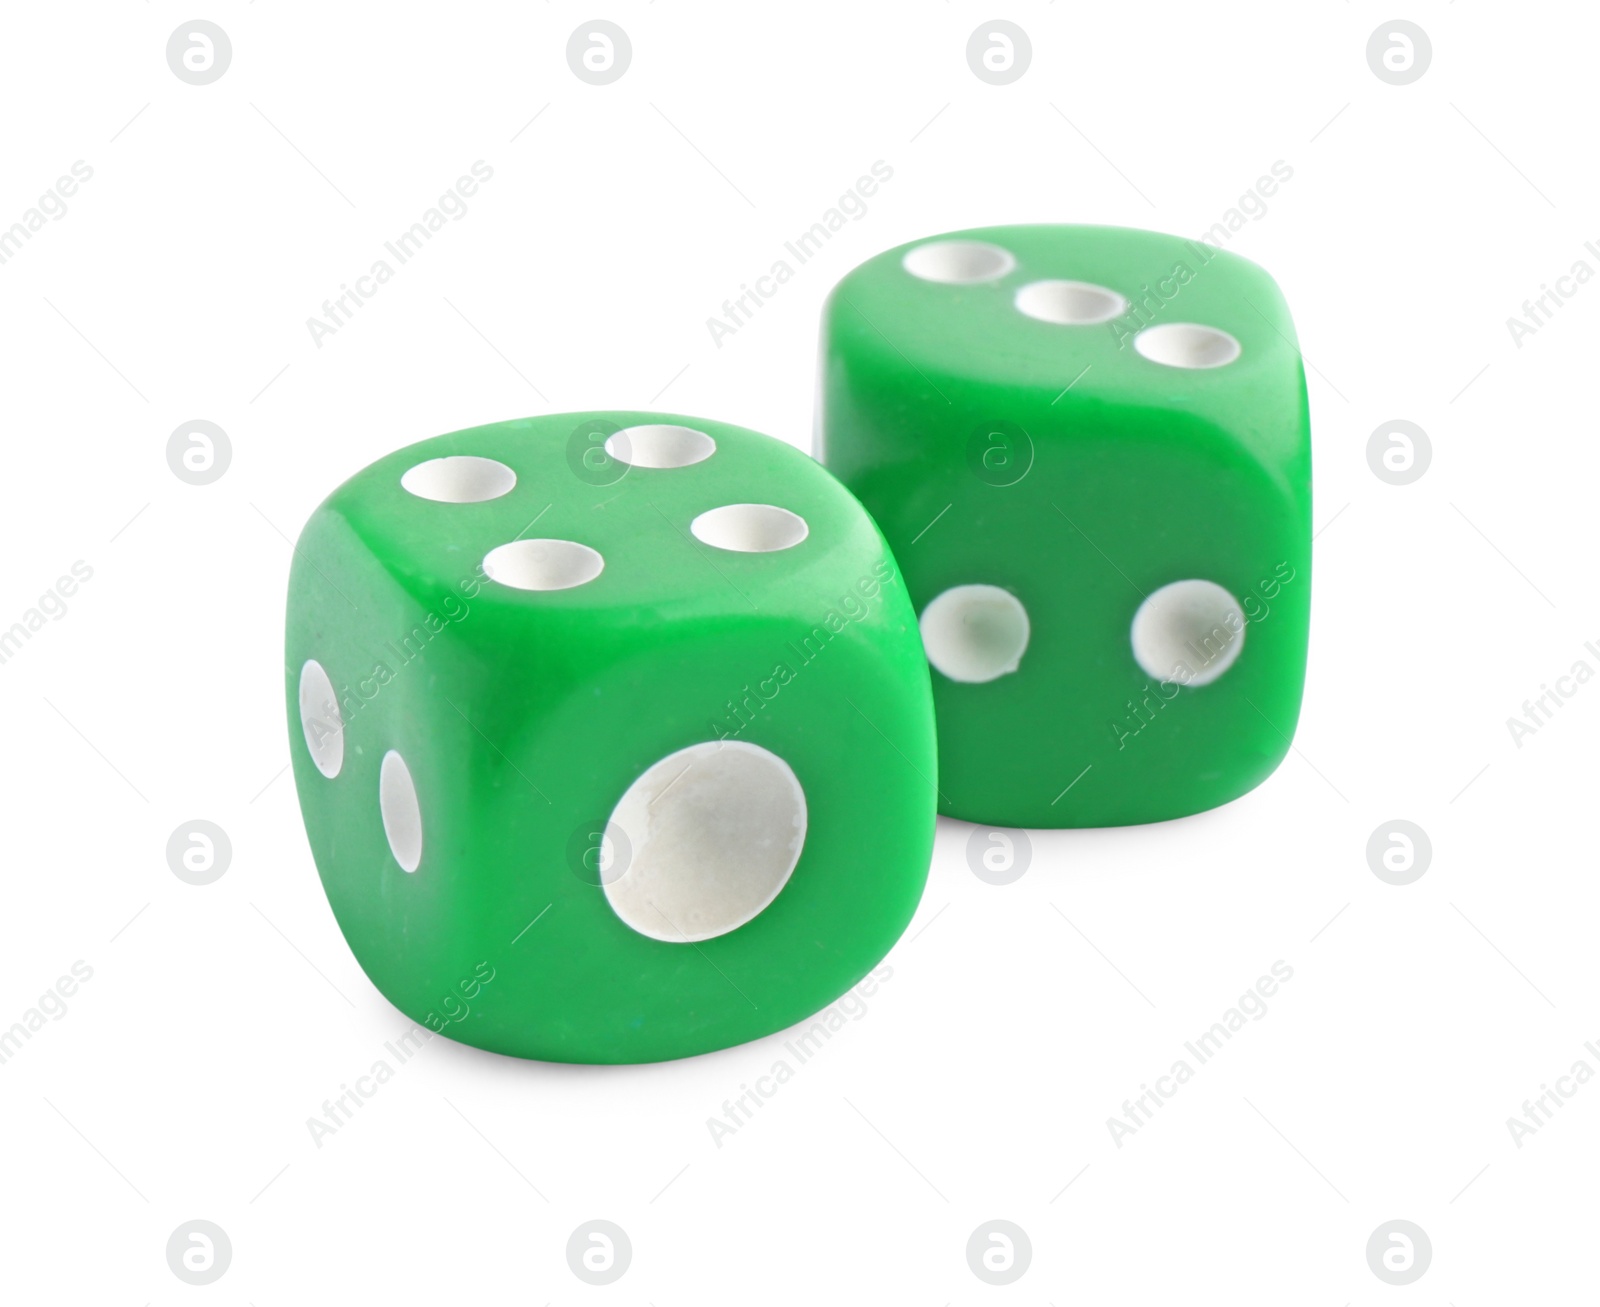 Photo of Two green game dices isolated on white